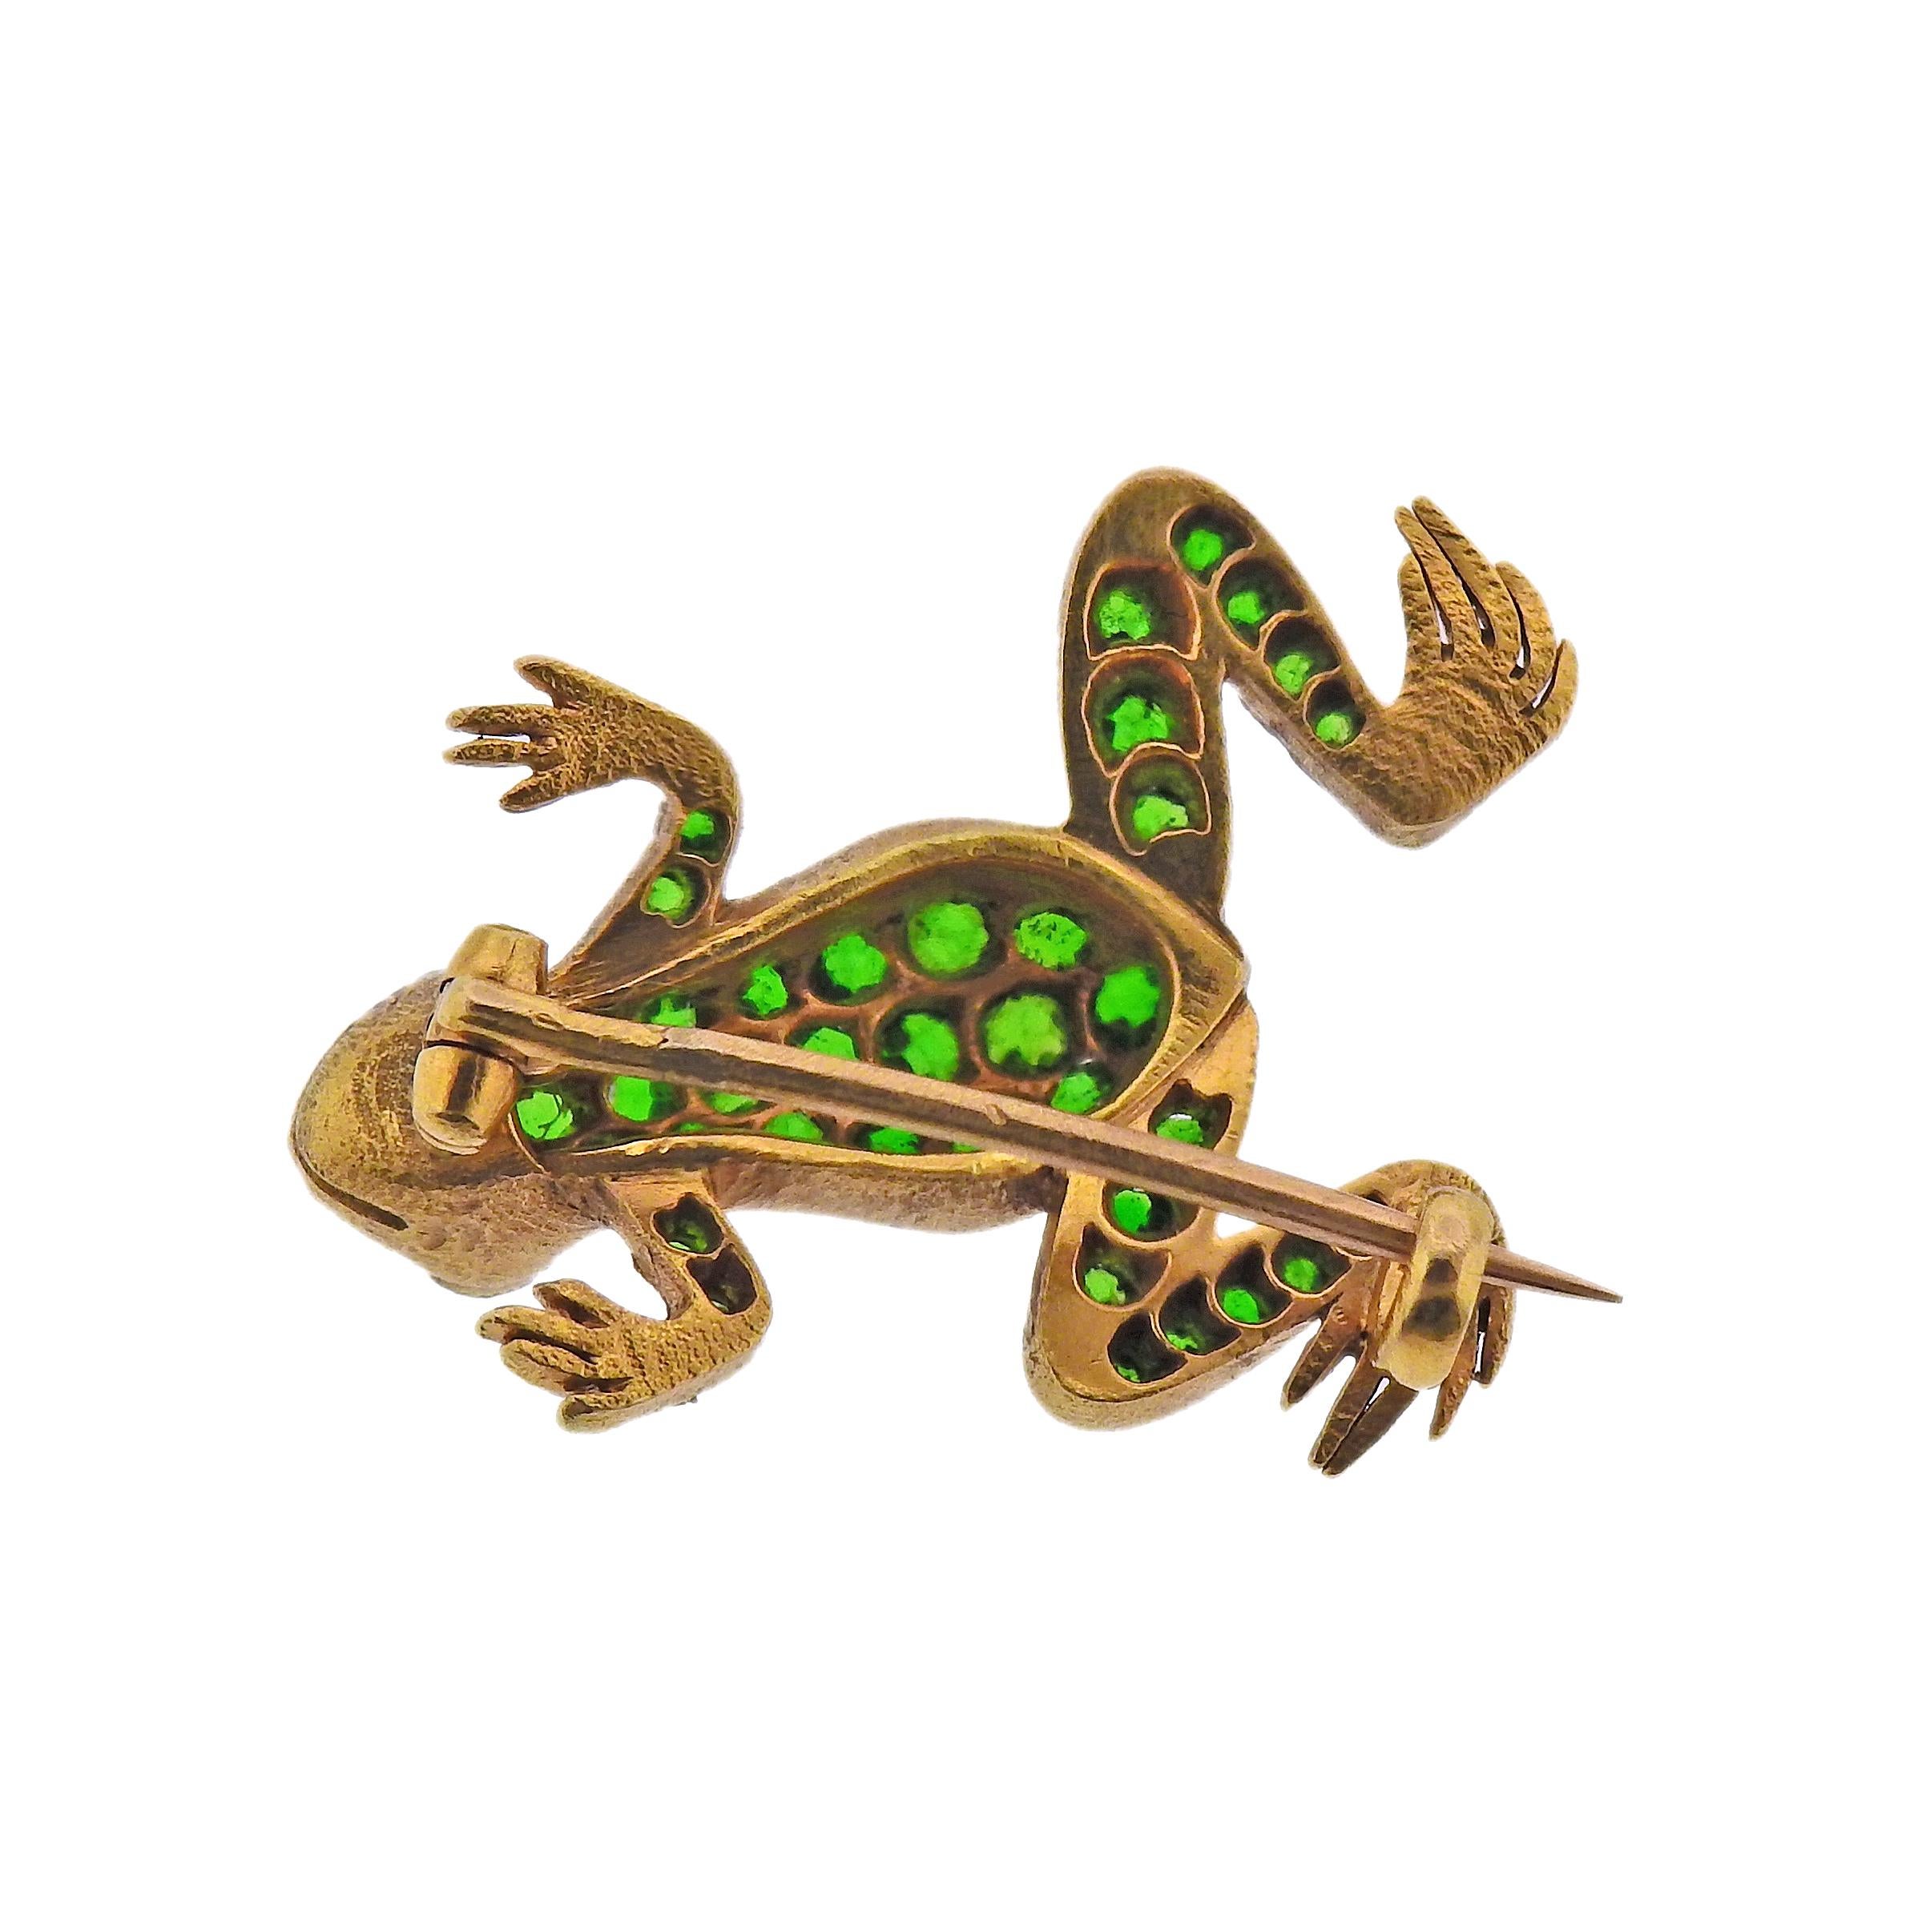 French made 18k gold frog brooch, with bright demantoid garnets and diamond eyes. Brooch measures 23mm x 20mm. Marked with Eagle head mark on the clasp. Weight - 5.8 grams. 